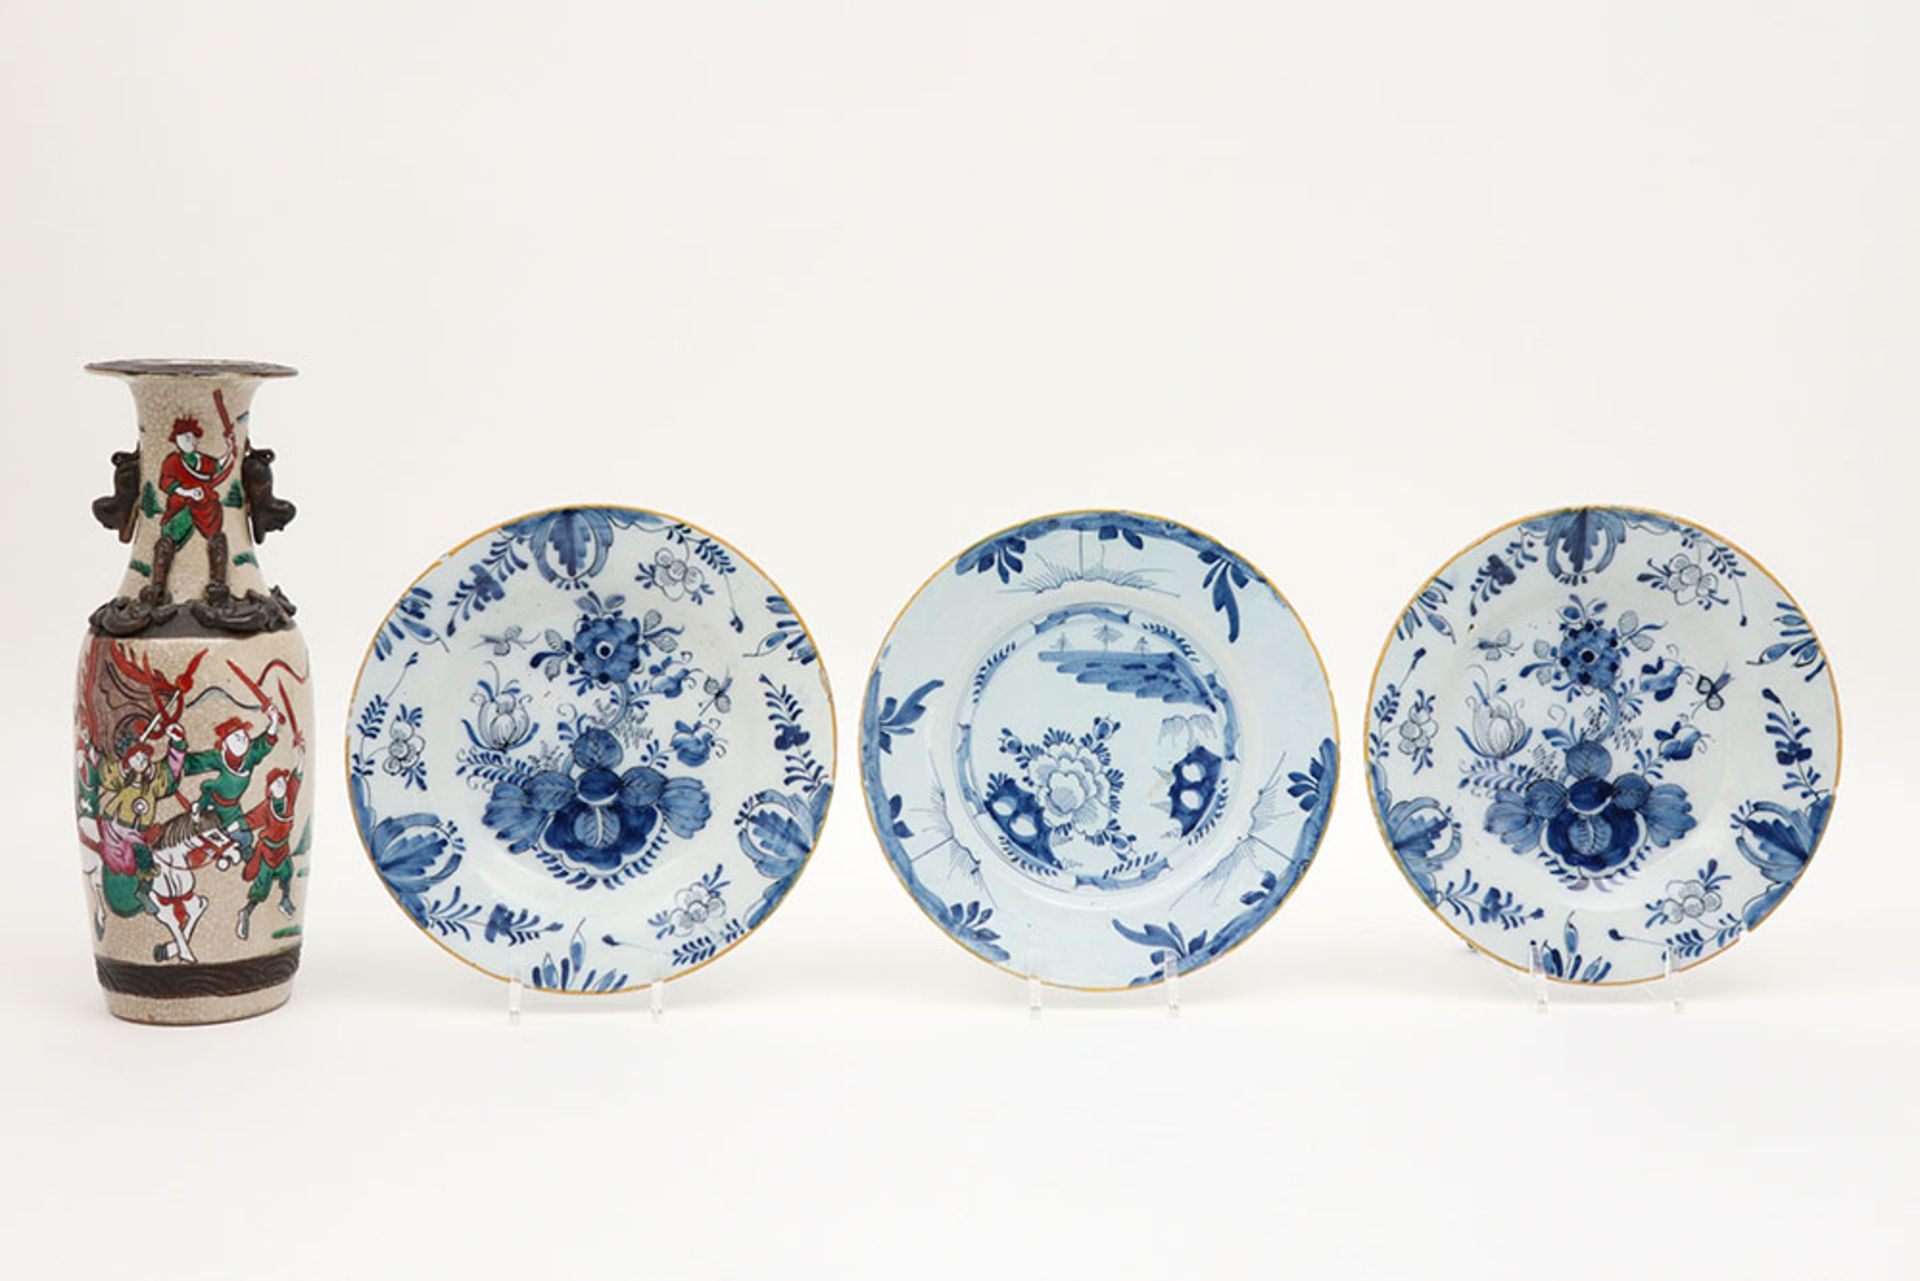 three 18th Cent. plates in ceramic from Delft with a blue-white decor and a Chinese vase in